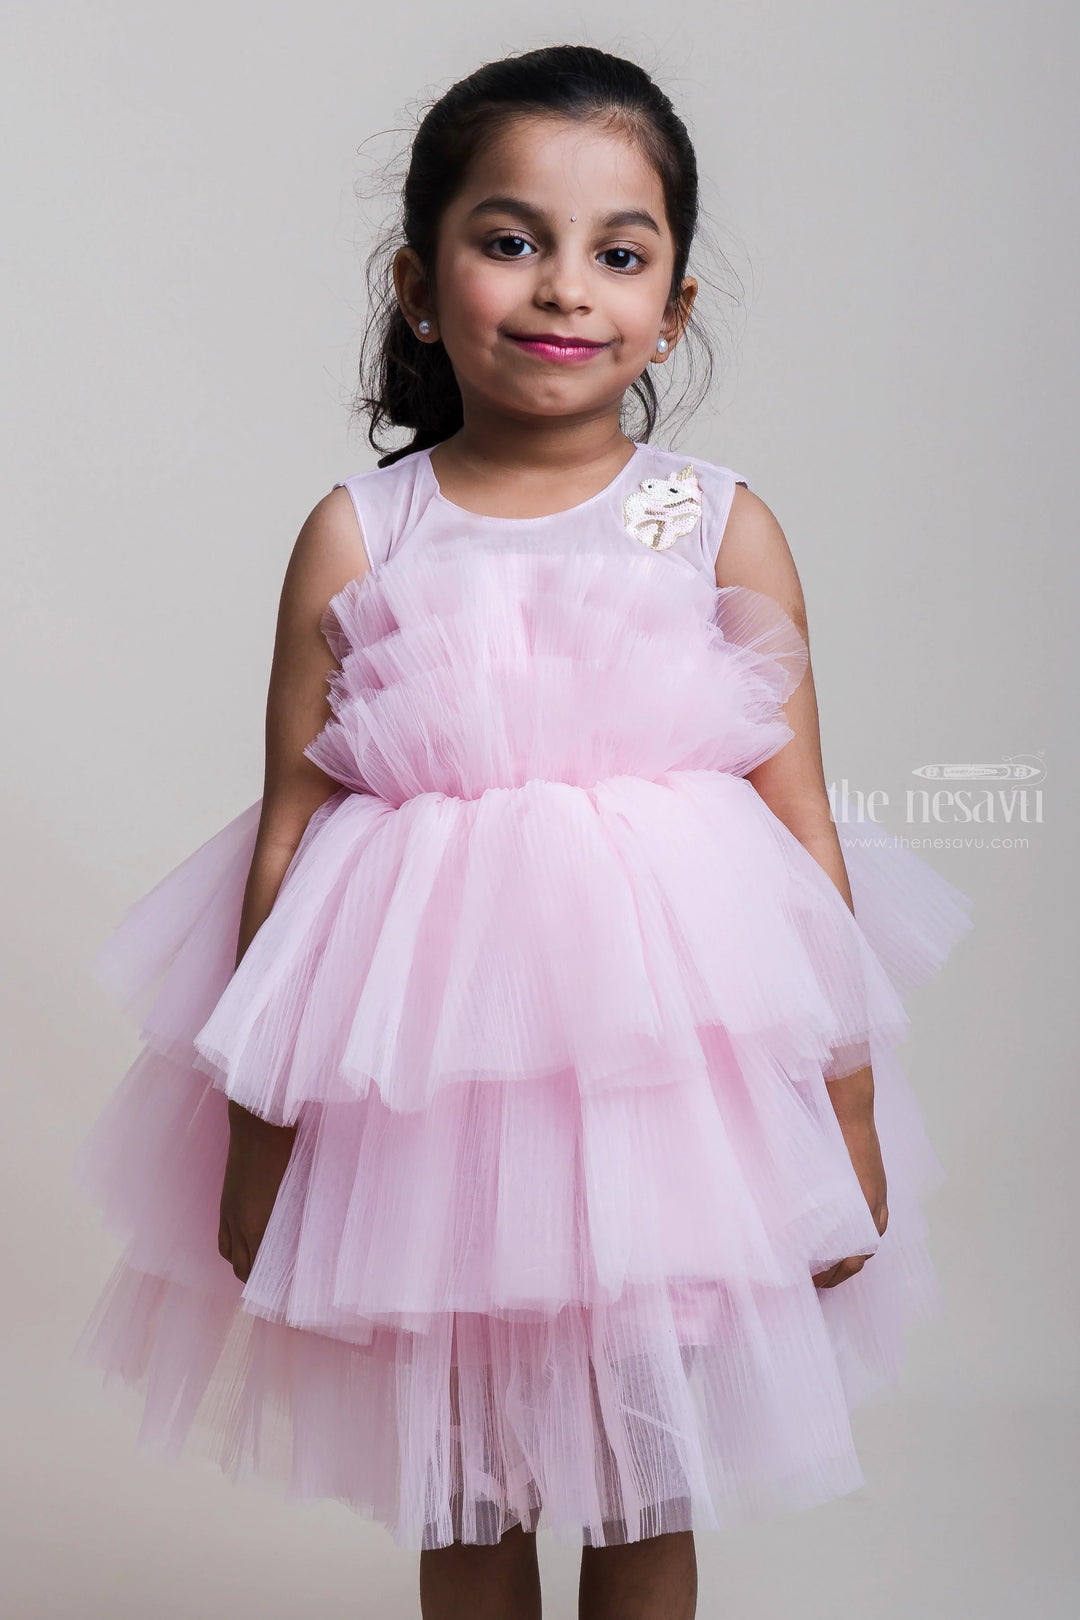 The Nesavu Girls Tutu Frock Netted And Layered Pink Frocks For Little Girls Nesavu 16 (1Y) / Pink PF99A-16 Fresh Pink Net Frocks Collection For Girls| New Arrival| The Nesavu